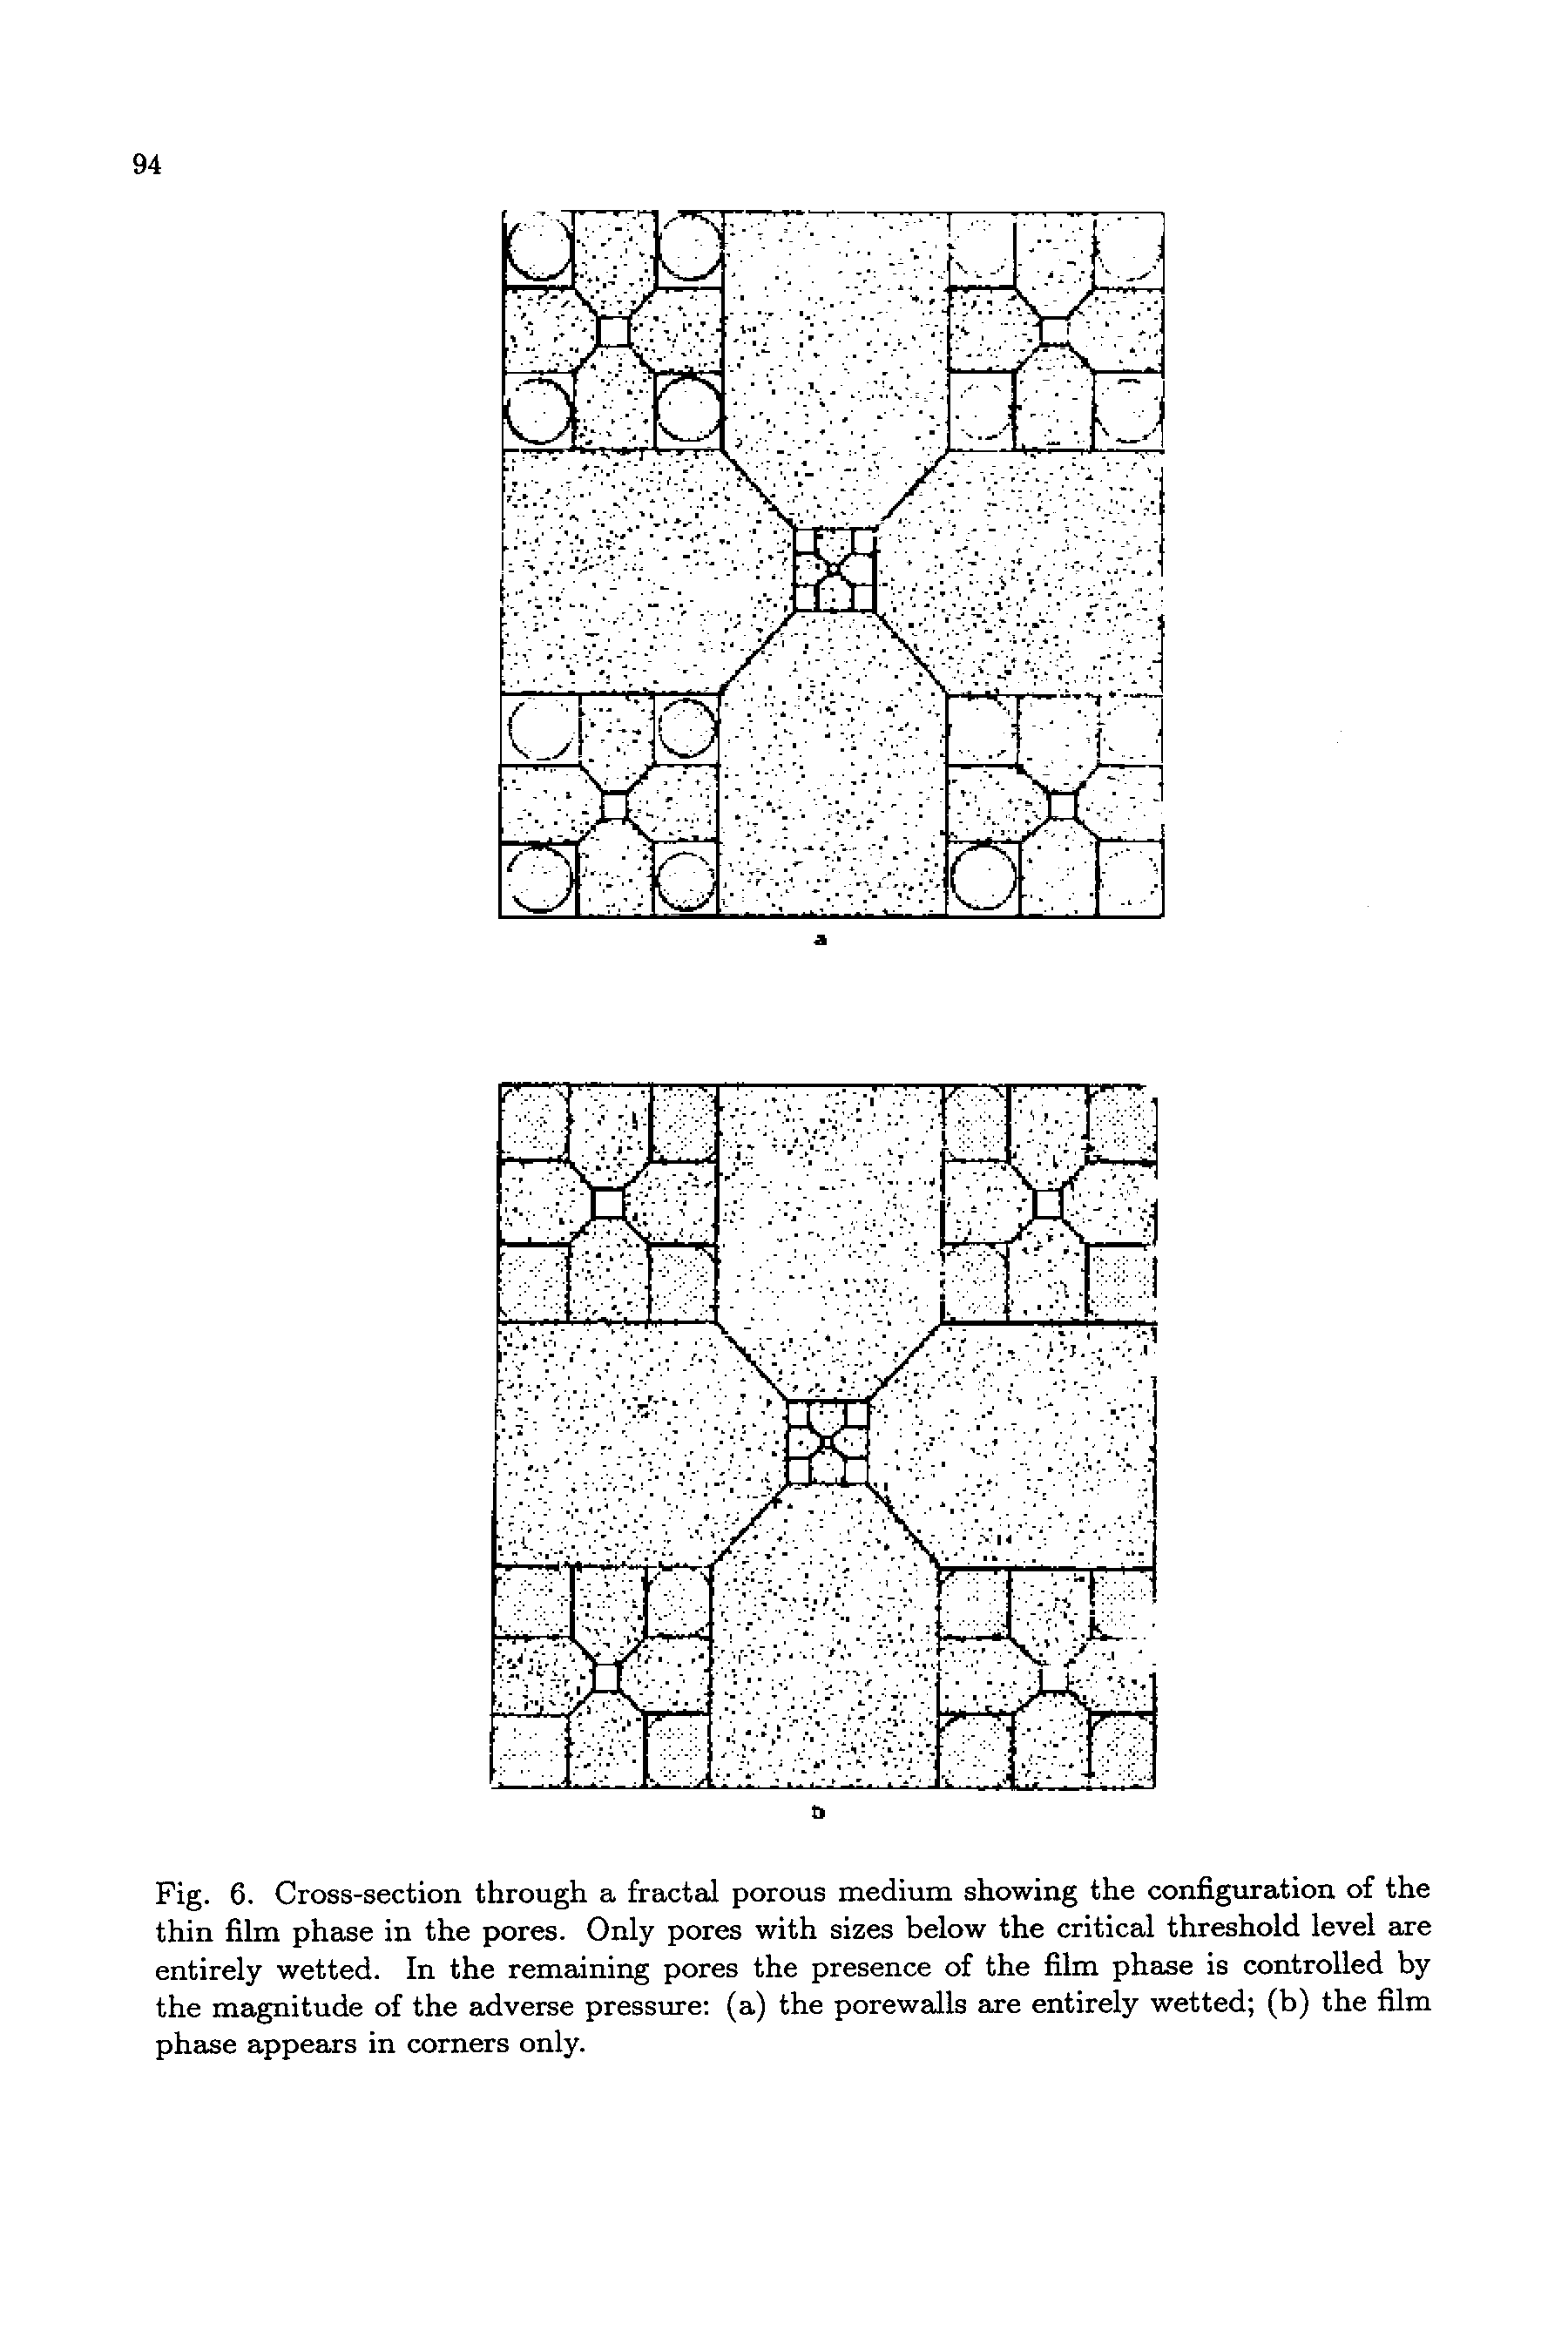 Fig. 6. Cross-section through a fractal porous medium showing the configuration of the thin film phase in the pores. Only pores with sizes below the critical threshold level are entirely wetted. In the remaining pores the presence of the film phase is controlled by the magnitude of the adverse pressure (a) the porewails are entirely wetted (b) the film phase appears in corners only.